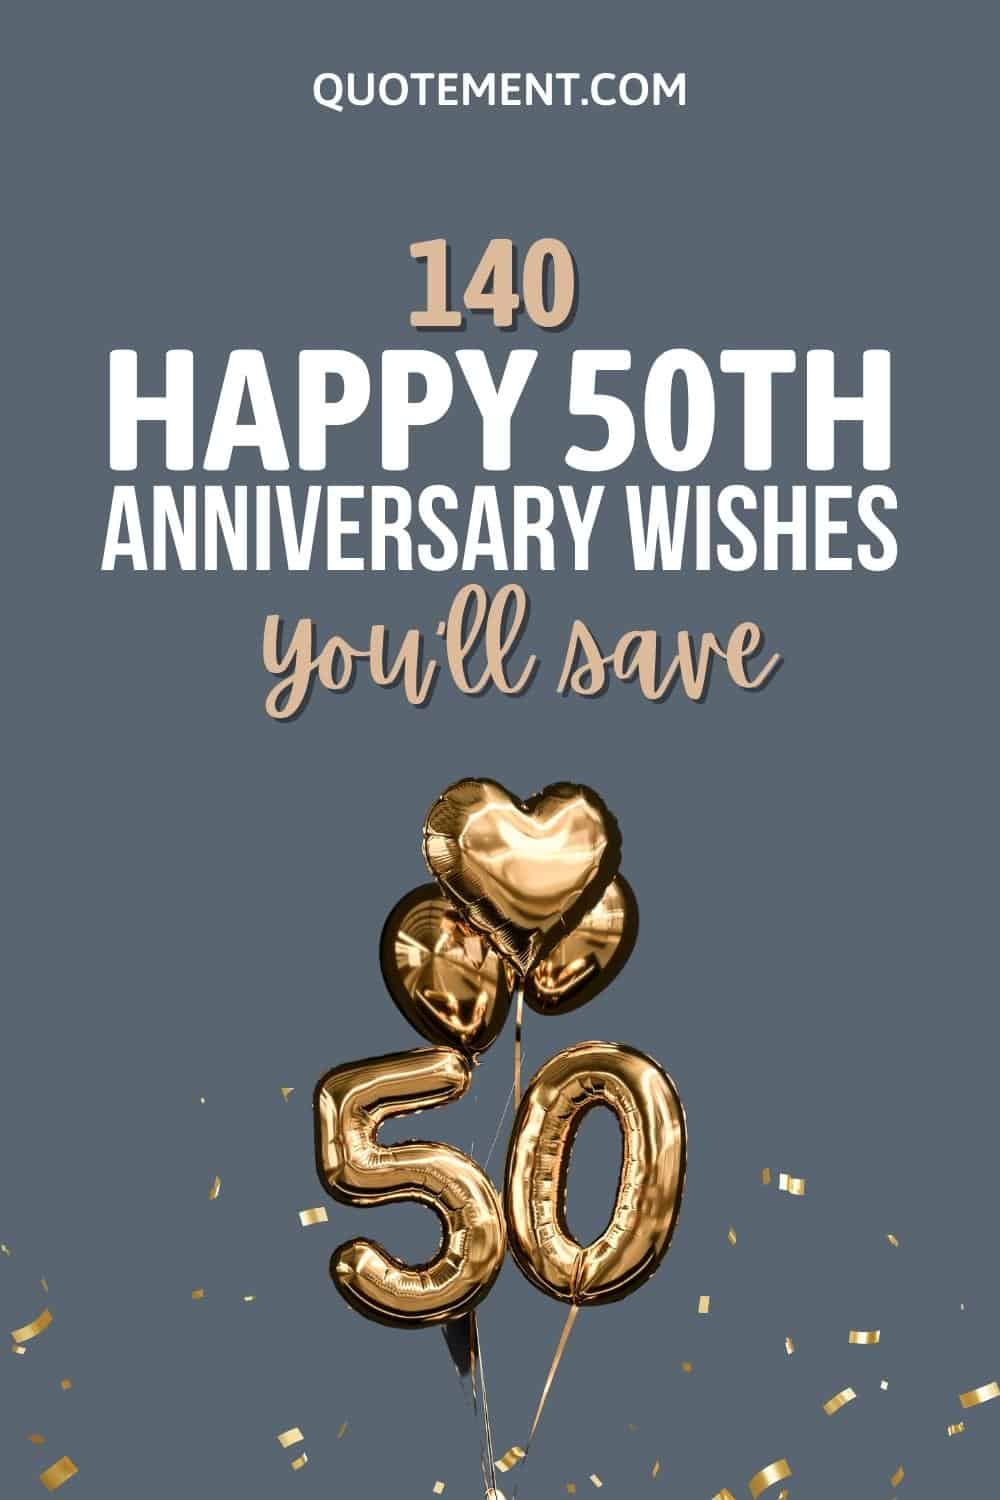 Top 140 Happy 50th Anniversary Wishes For Your Dearest
